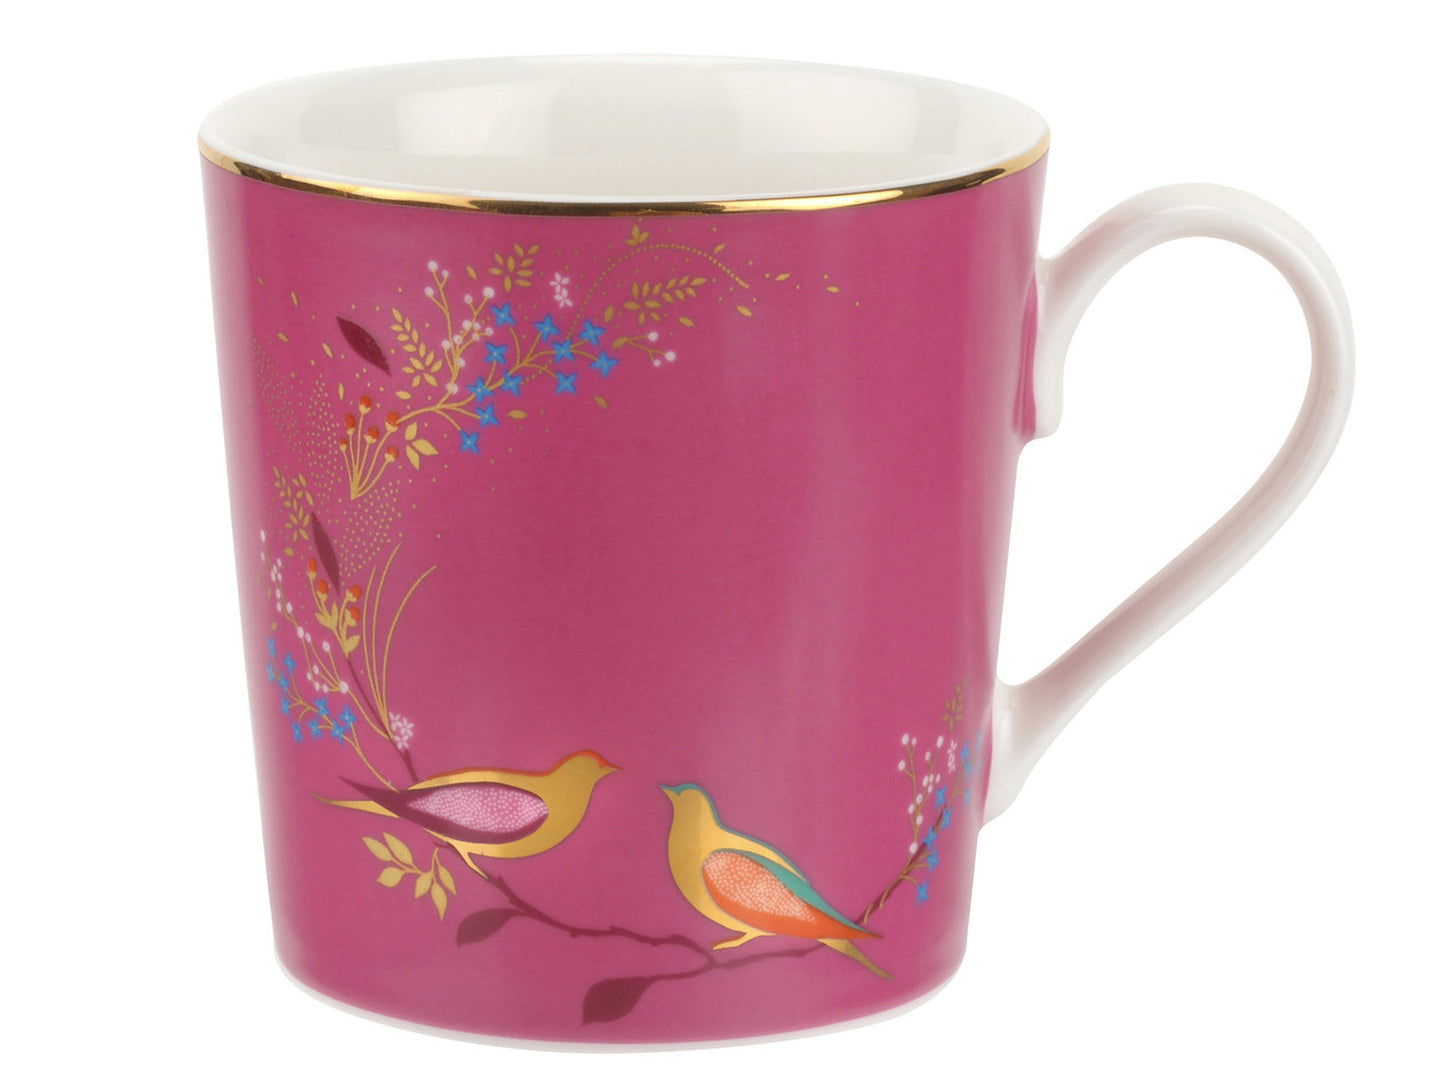 A mug with a pink background, featuring gold embellishments, two birds and abstract foliage